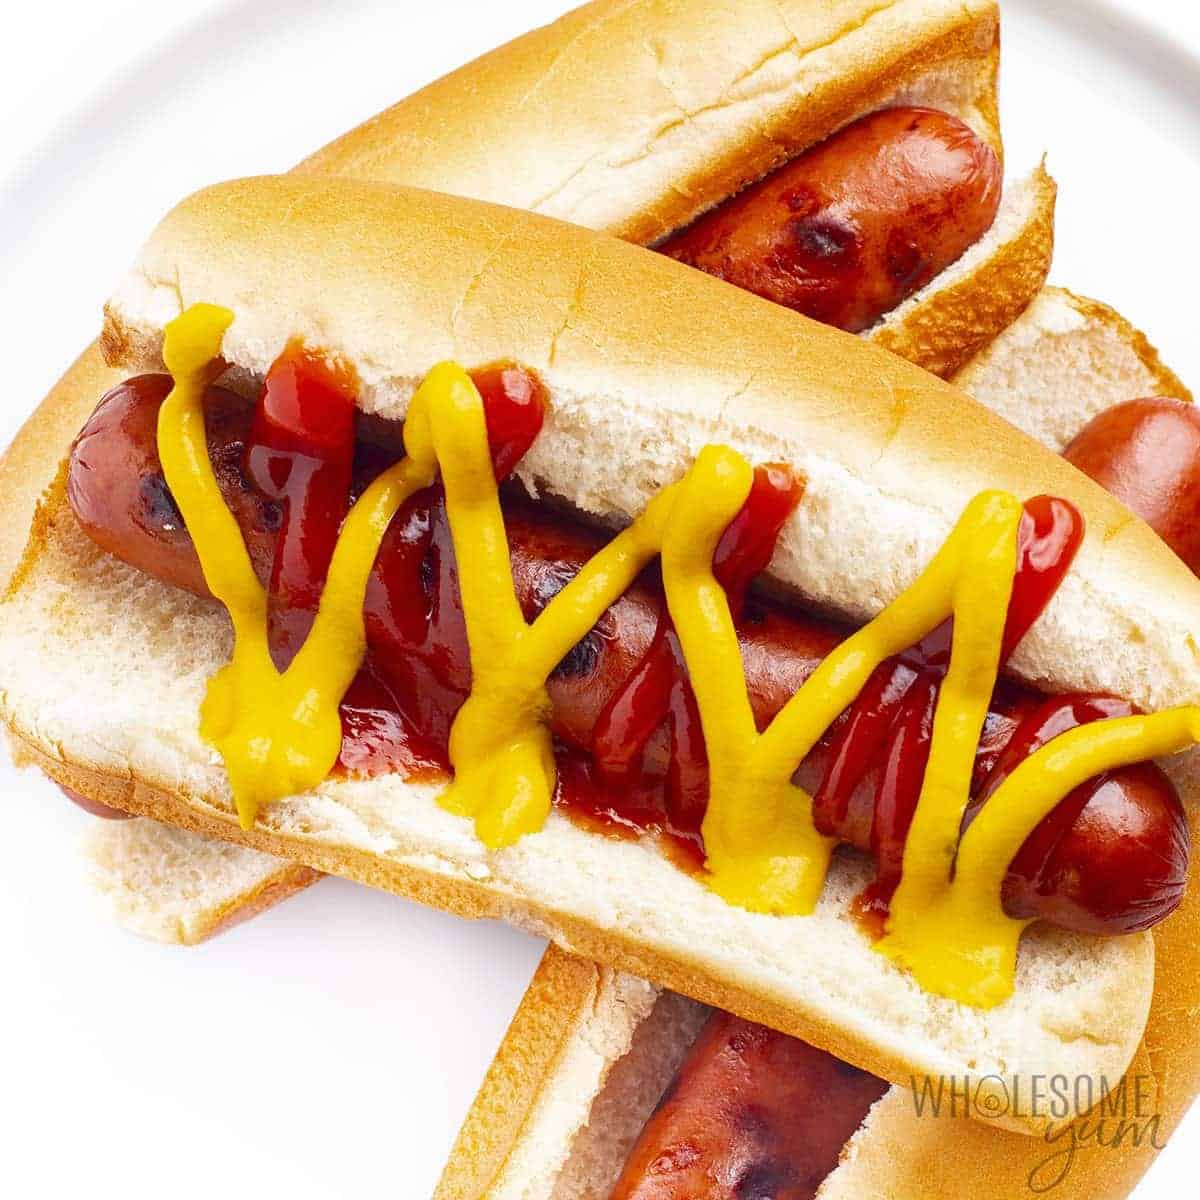 Are hot dogs keto? These plain cooked hot dogs are low in carbs as long as you don't eat the bun.